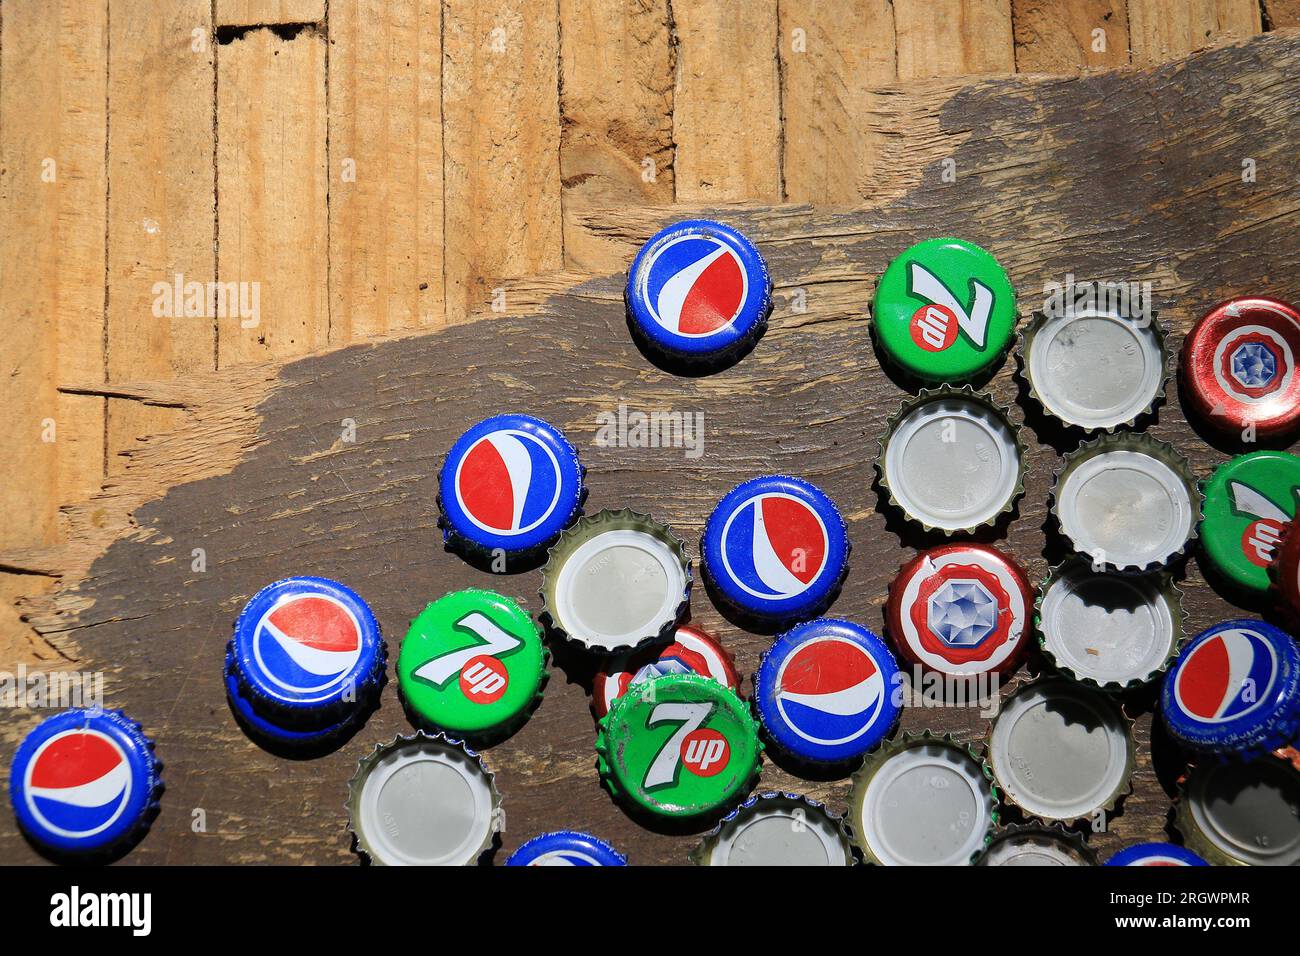 Zgharta, Lebanon - May 28, 2022: Discarded caps of Pepsi Cola, 7Up, and Almaza beer on a wooden table. Stock Photo